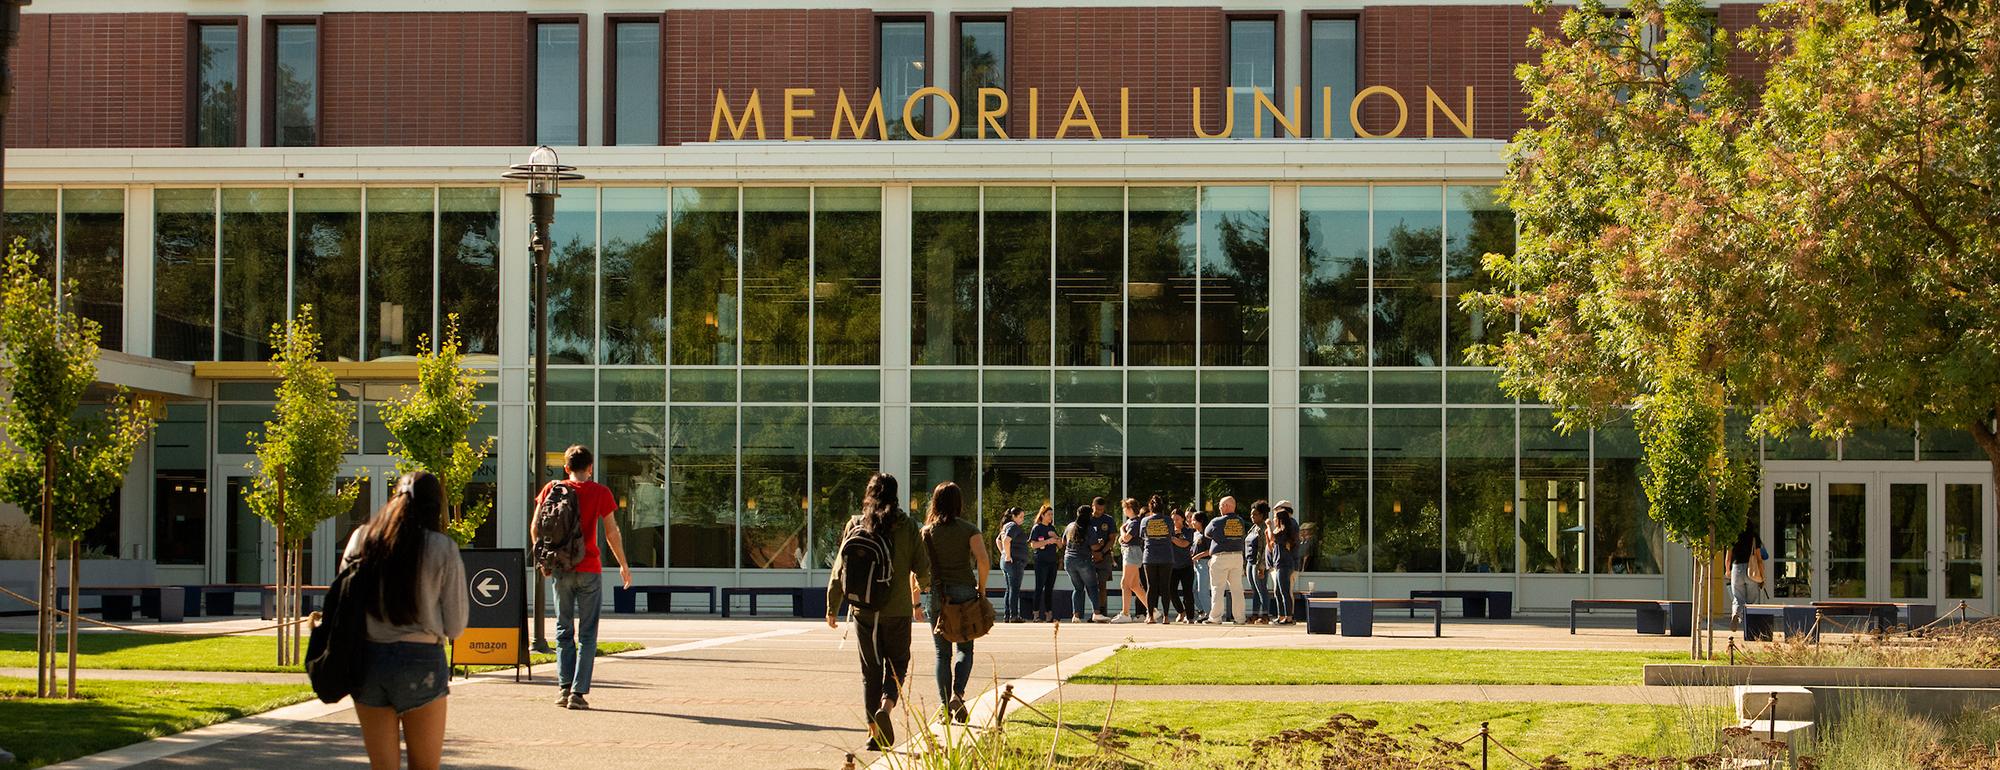 students walking in front of Memorial Union building